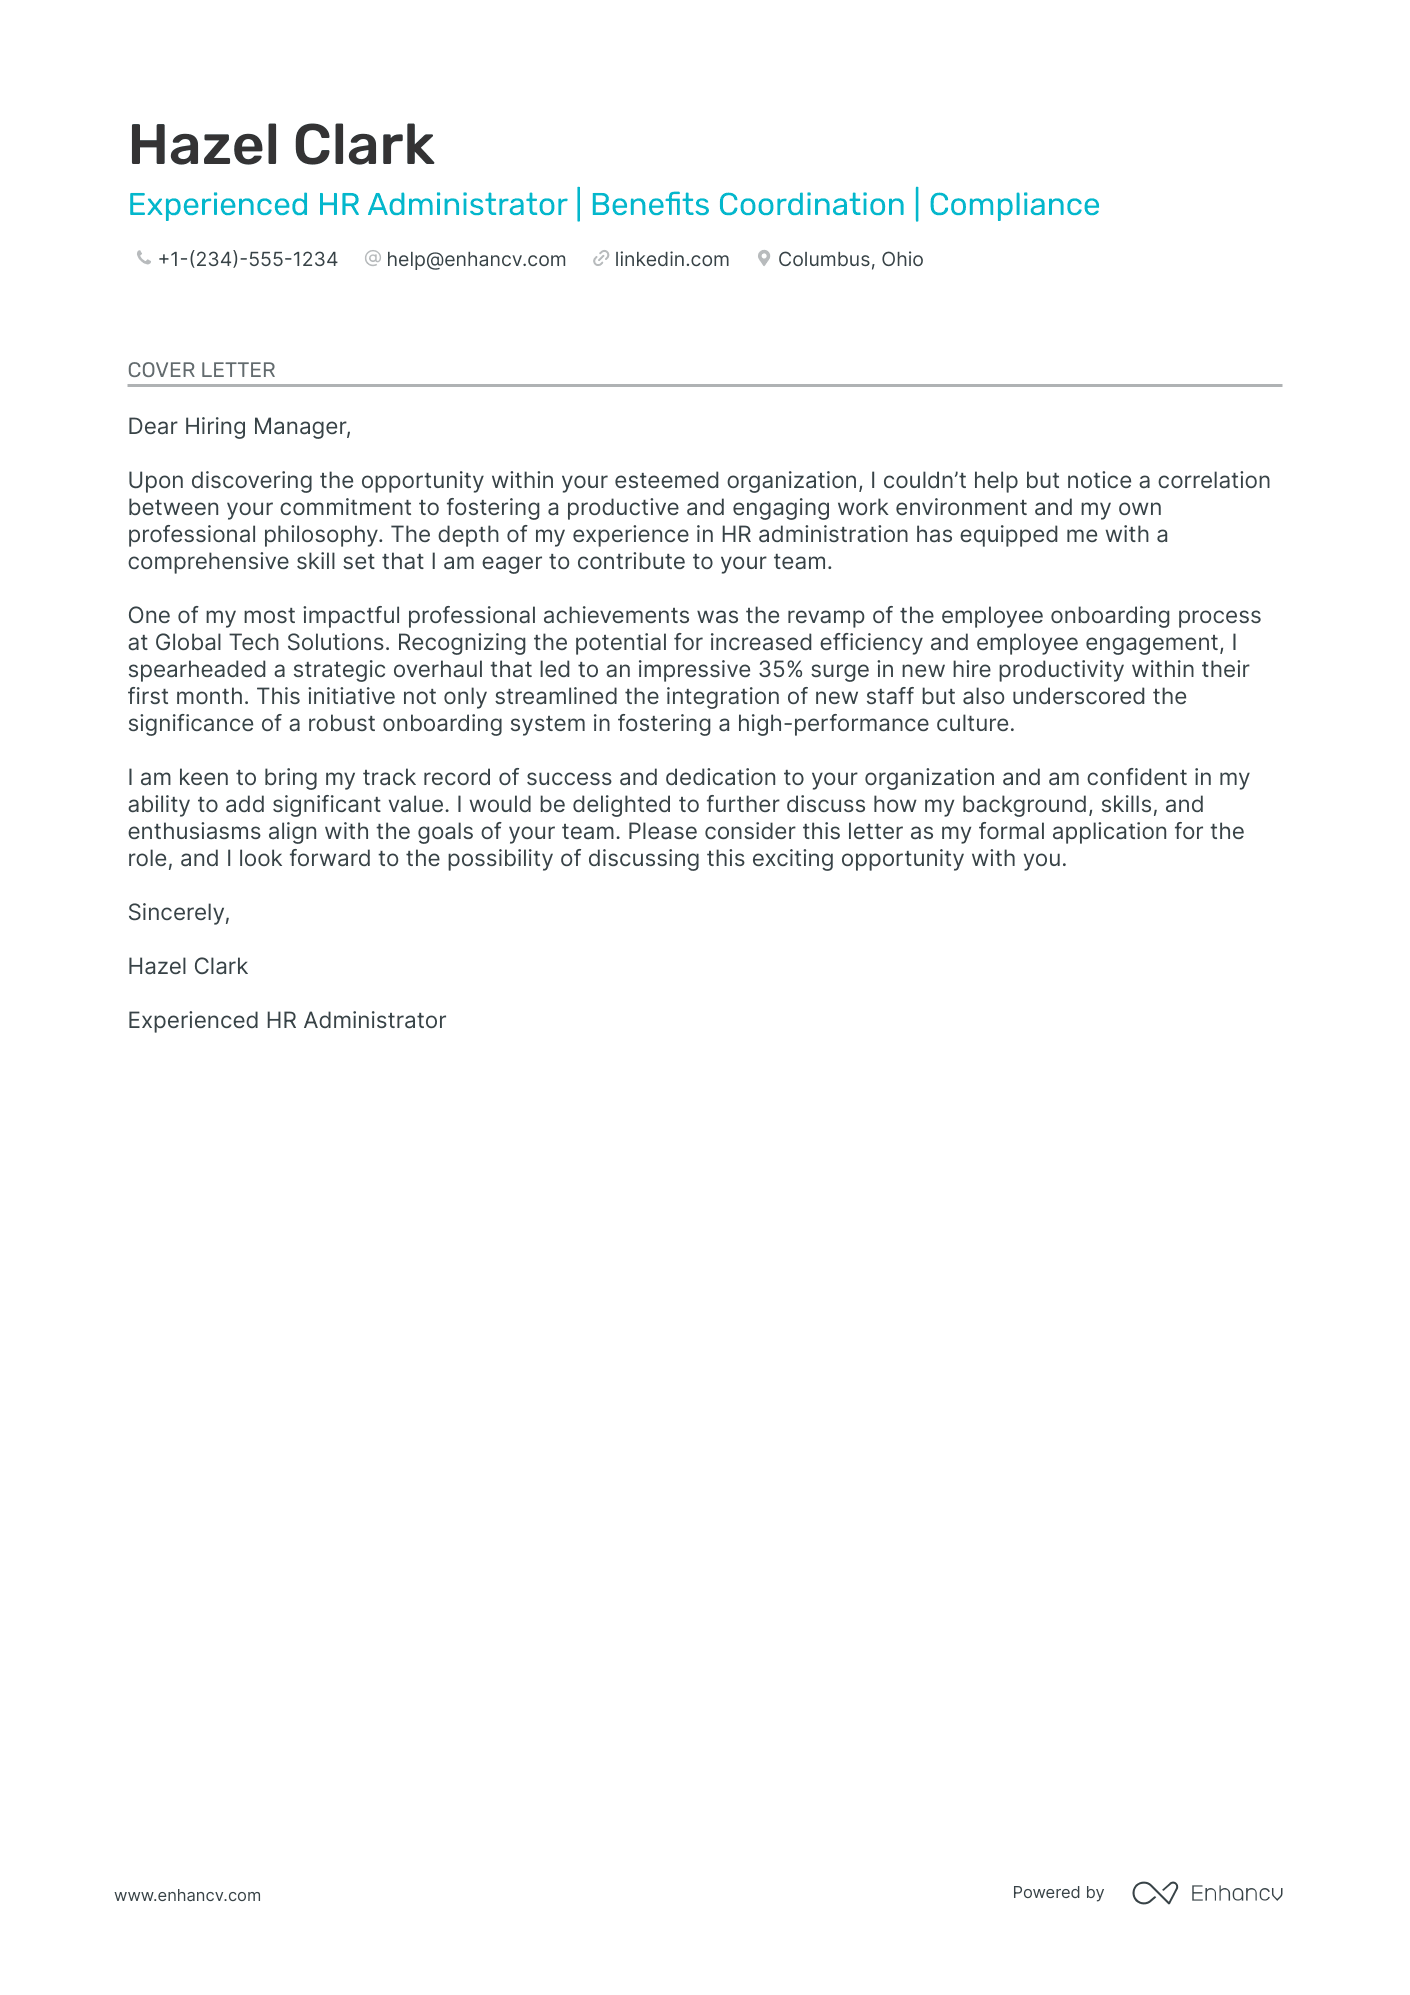 cover letter sample for an administrative assistant